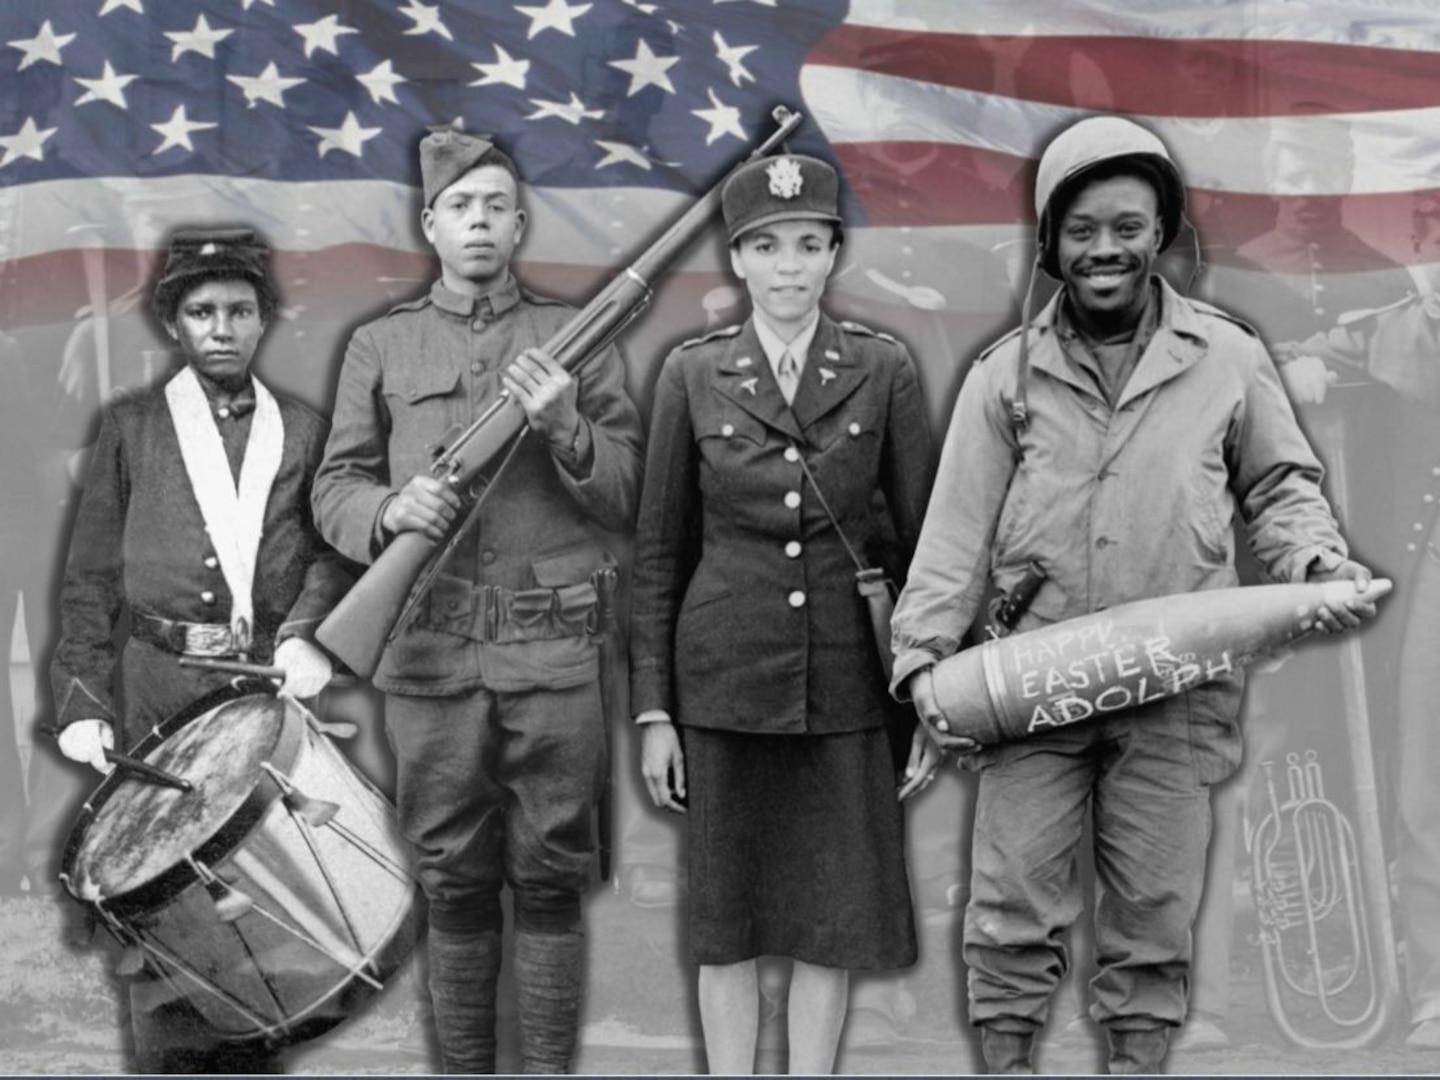 Museum recognizes African-Americans' contribution to armed forces